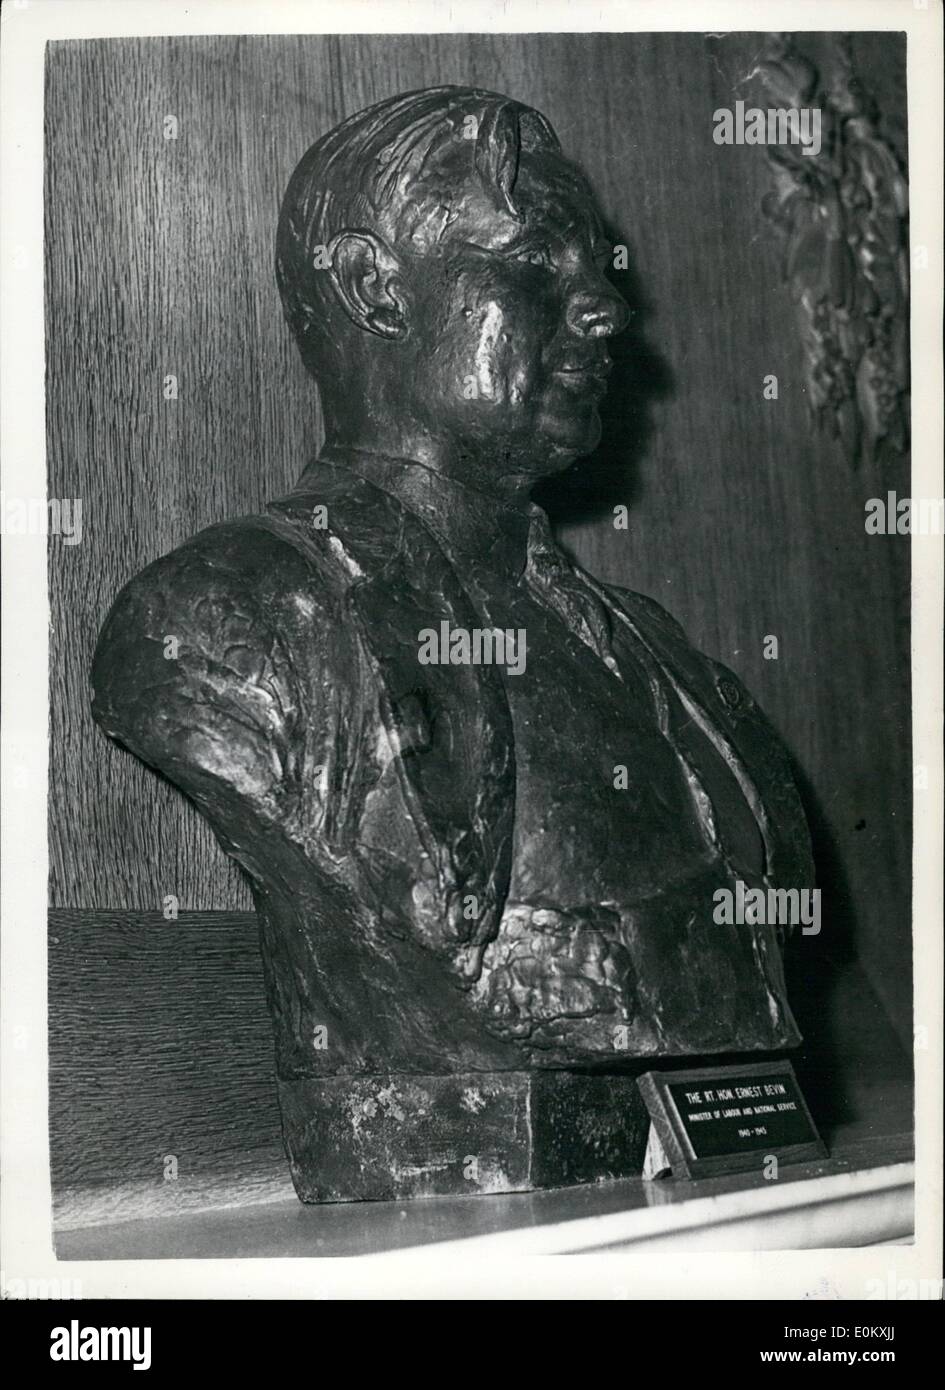 Oct. 10, 1952 - Bust of the Late Mr. Ernest Bevin Unveiled... Ceremony at St. James' Square... A bust of the late Mr. Ernest Bevin was unveiled this afternoon at the quarterly meeting of the National Joint Advisory Council, representing the British Employers' Confederation and the Trade Union Congress... The bust is being presented to the Ministry of Labour and National Service by the Transport and General Workers' Union... Keystone Photo Shows: The bust of Mr. Ernest Bevin after the unveiling this afternoon. Stock Photo